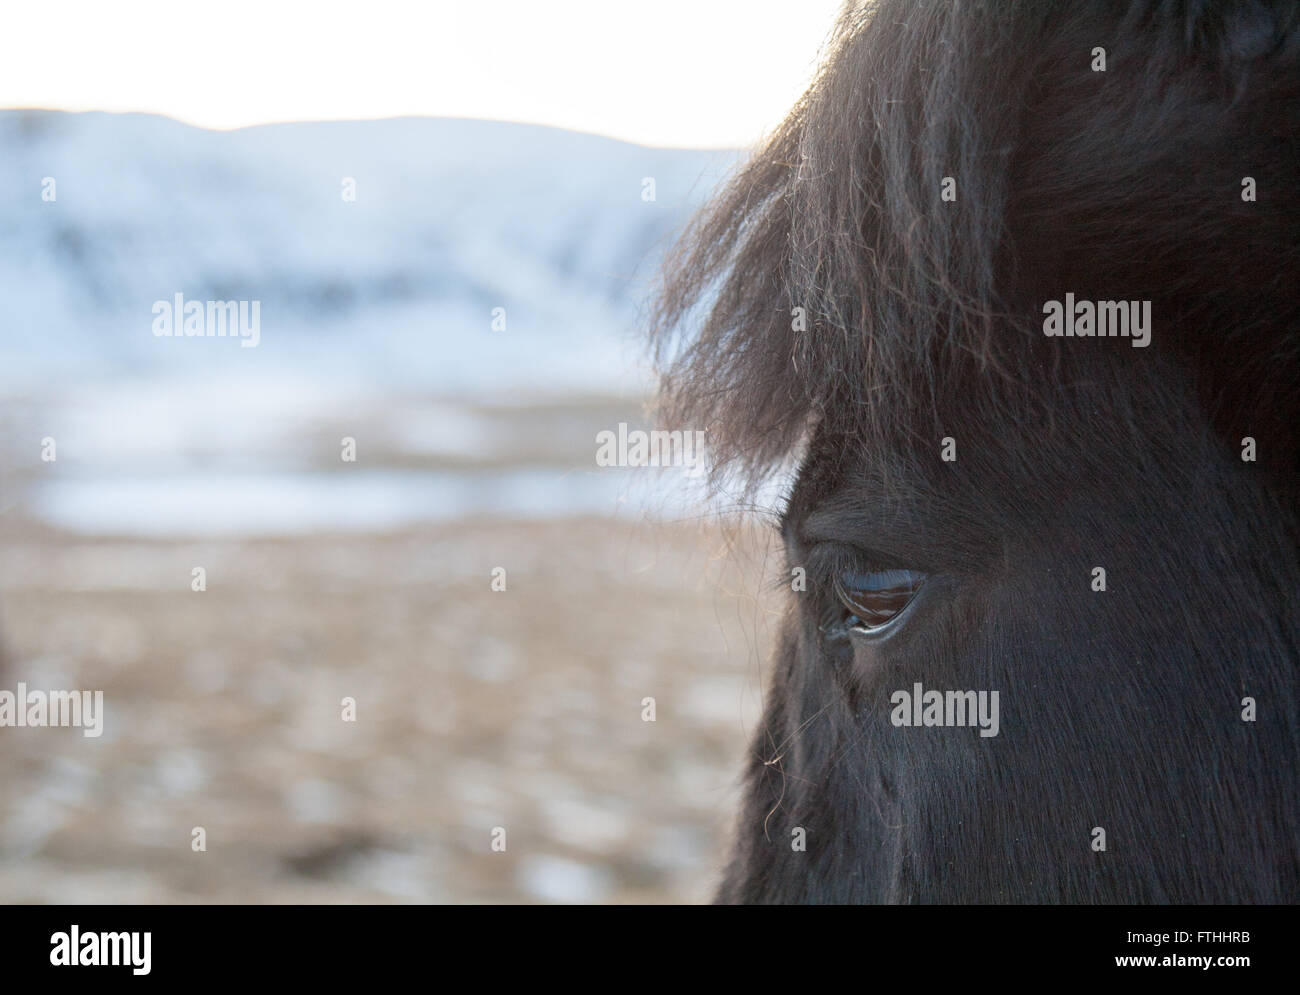 Close up of black Icelandic pony's eye in a field with snowy mountains in the background Stock Photo